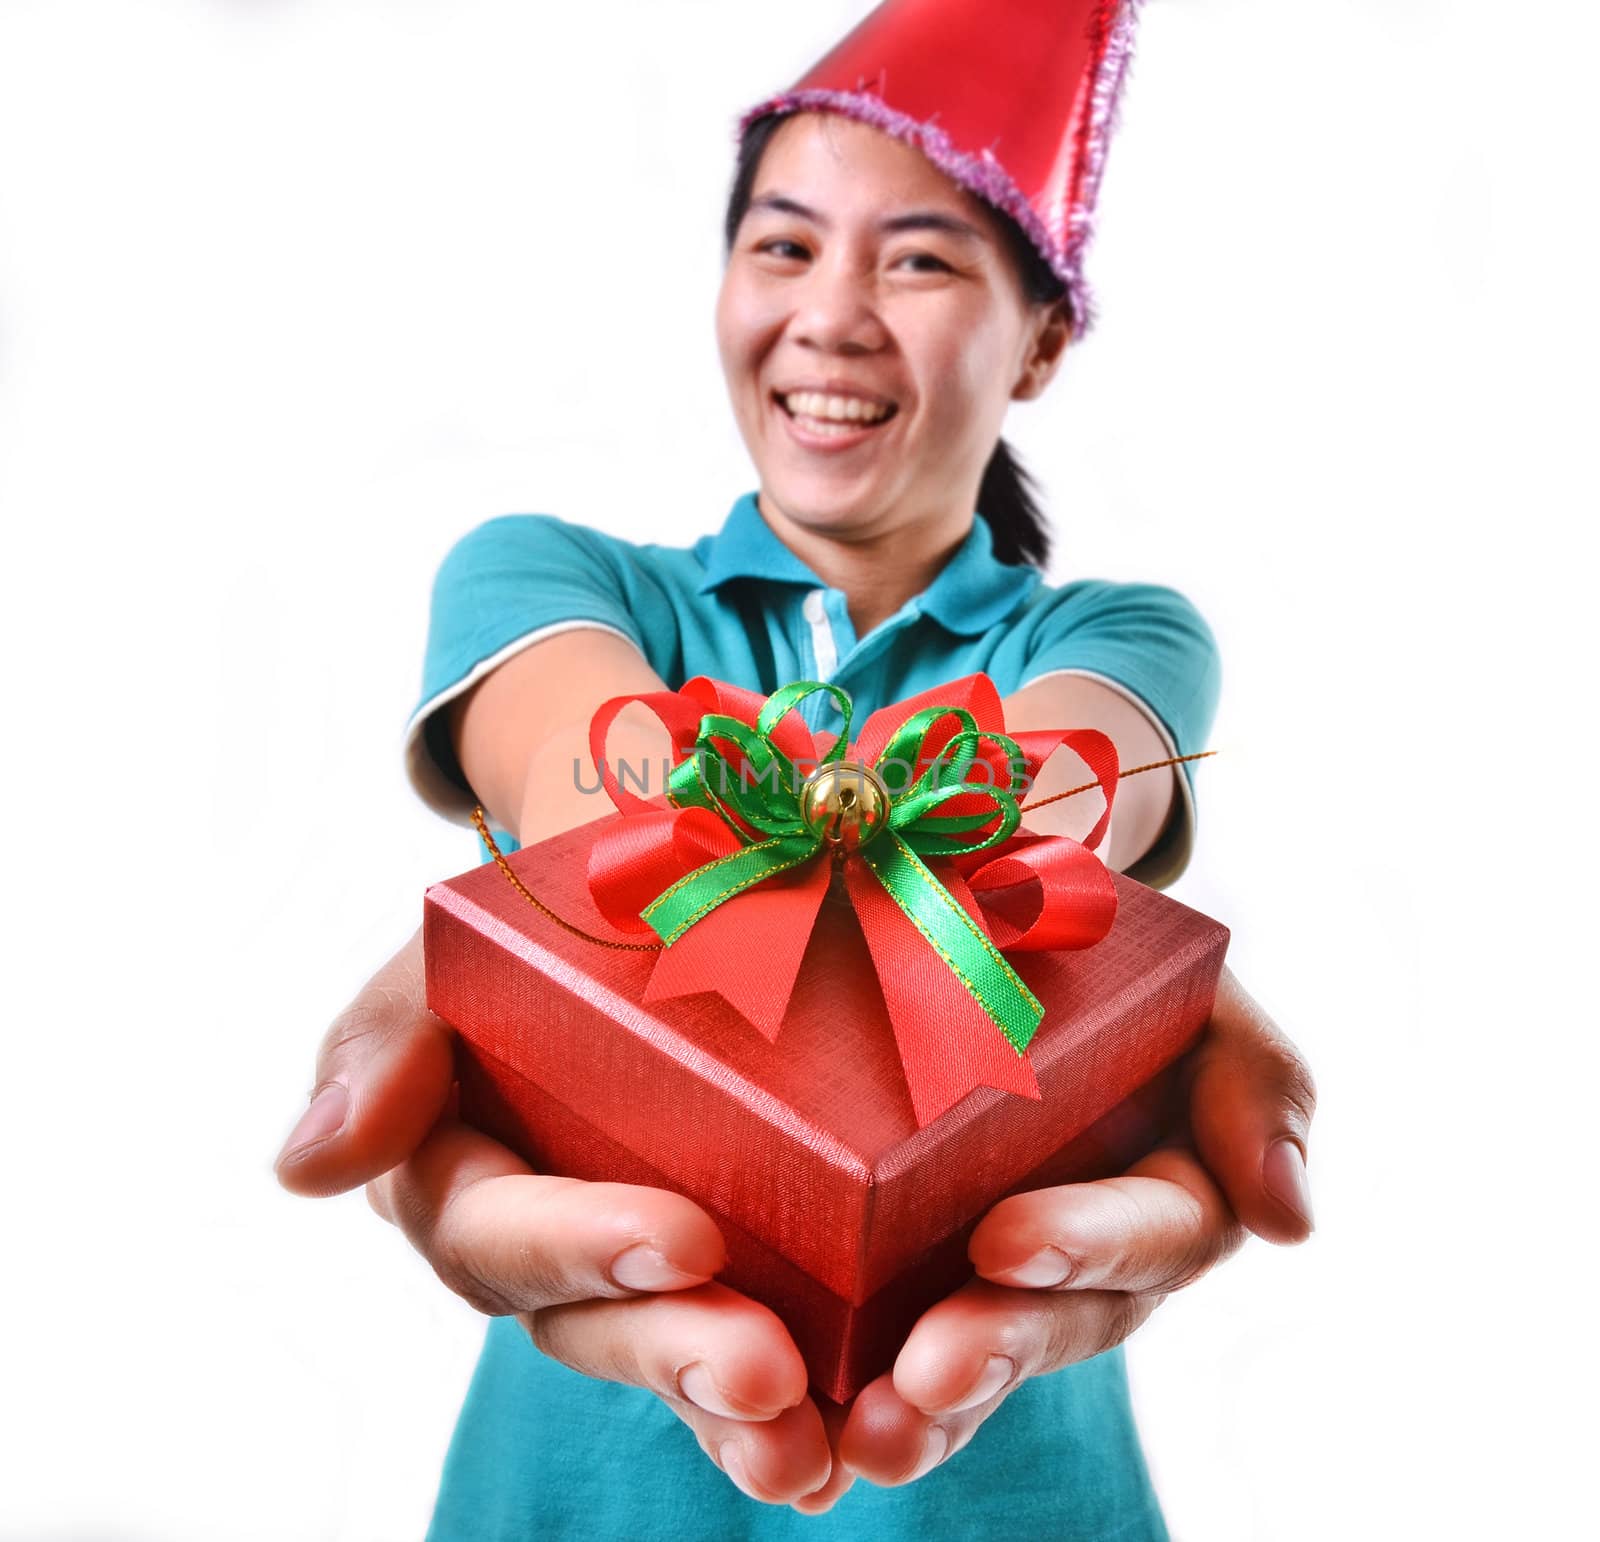 woman smile and hold gift box in hands  by anankkml